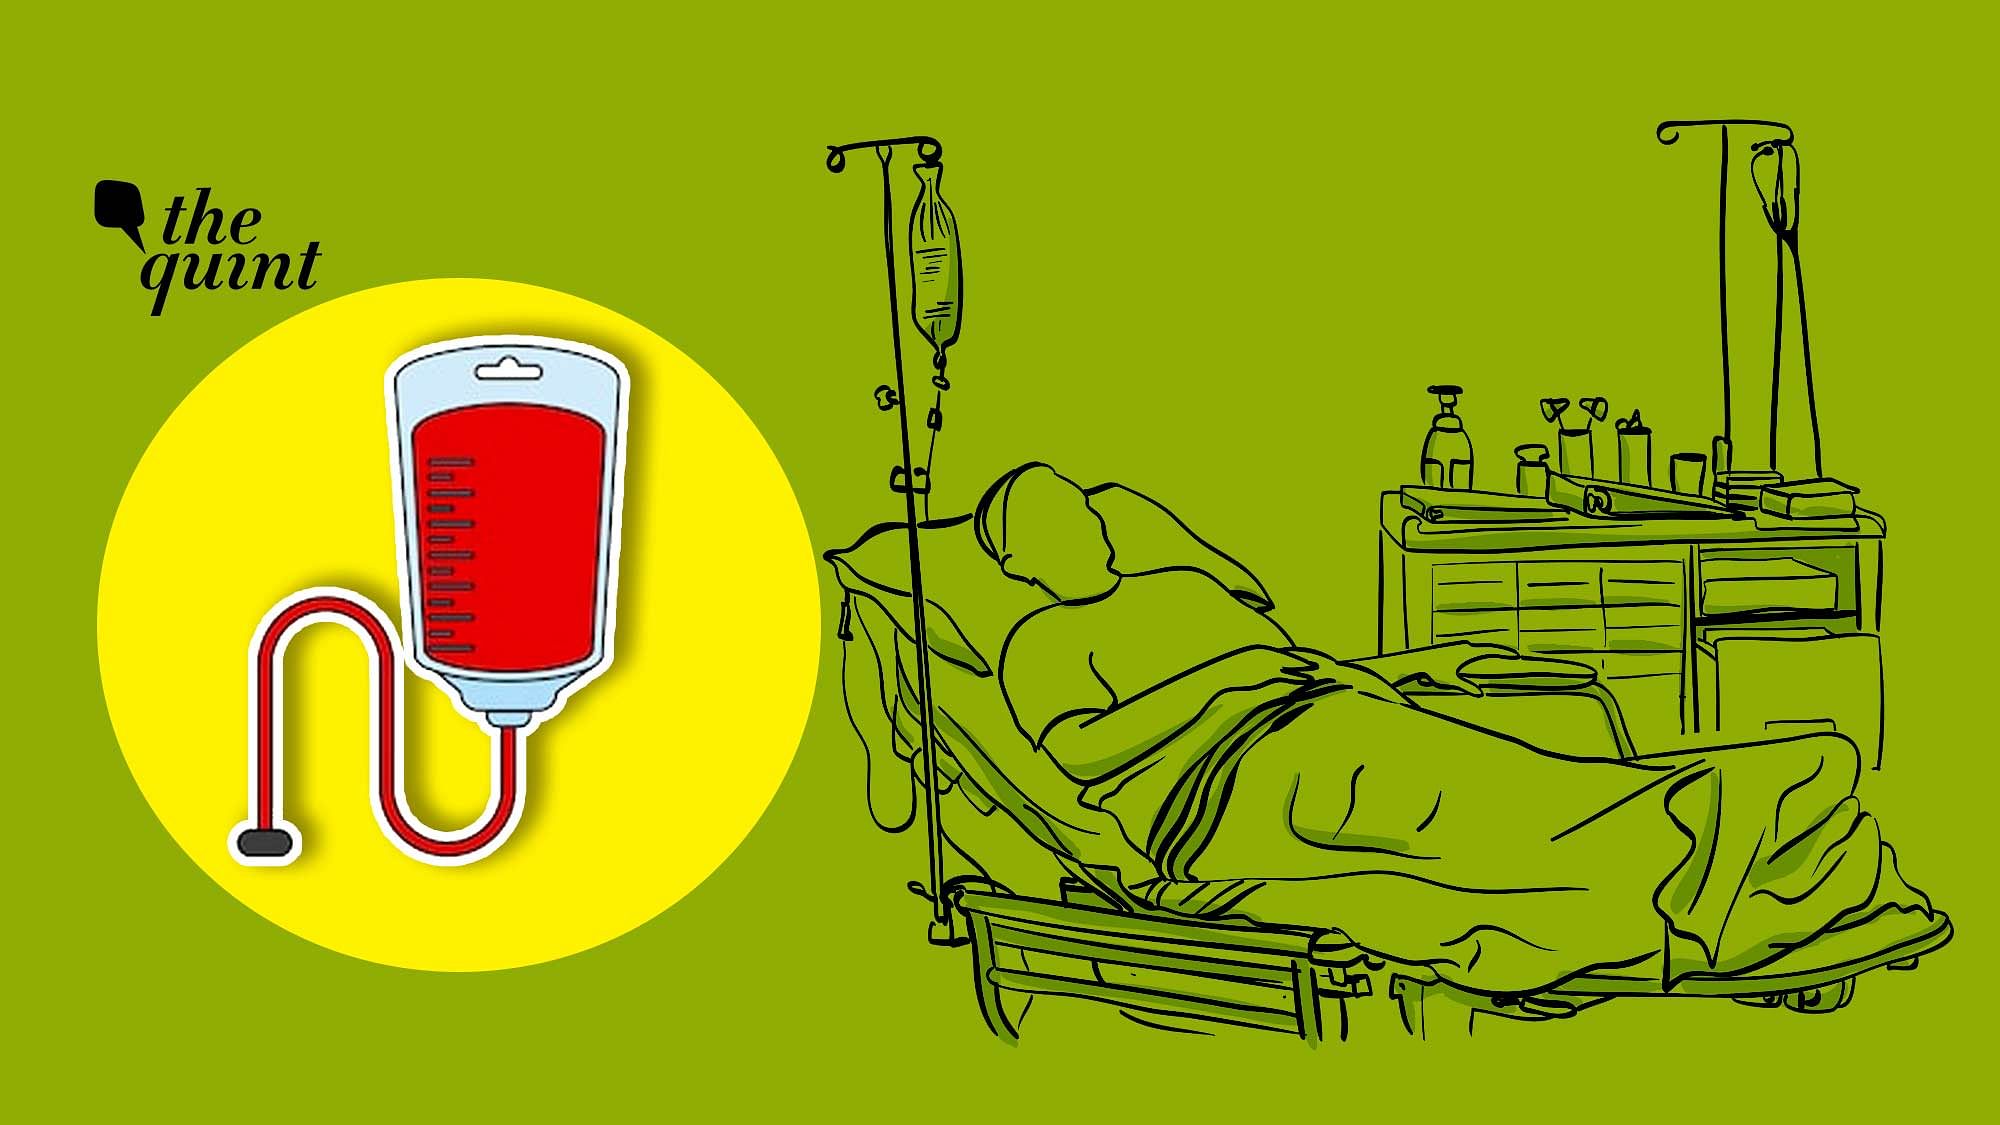 The Quint spoke to patients, blood banks and NGOs to understand how Chennai is now facing a shortage of blood supply.